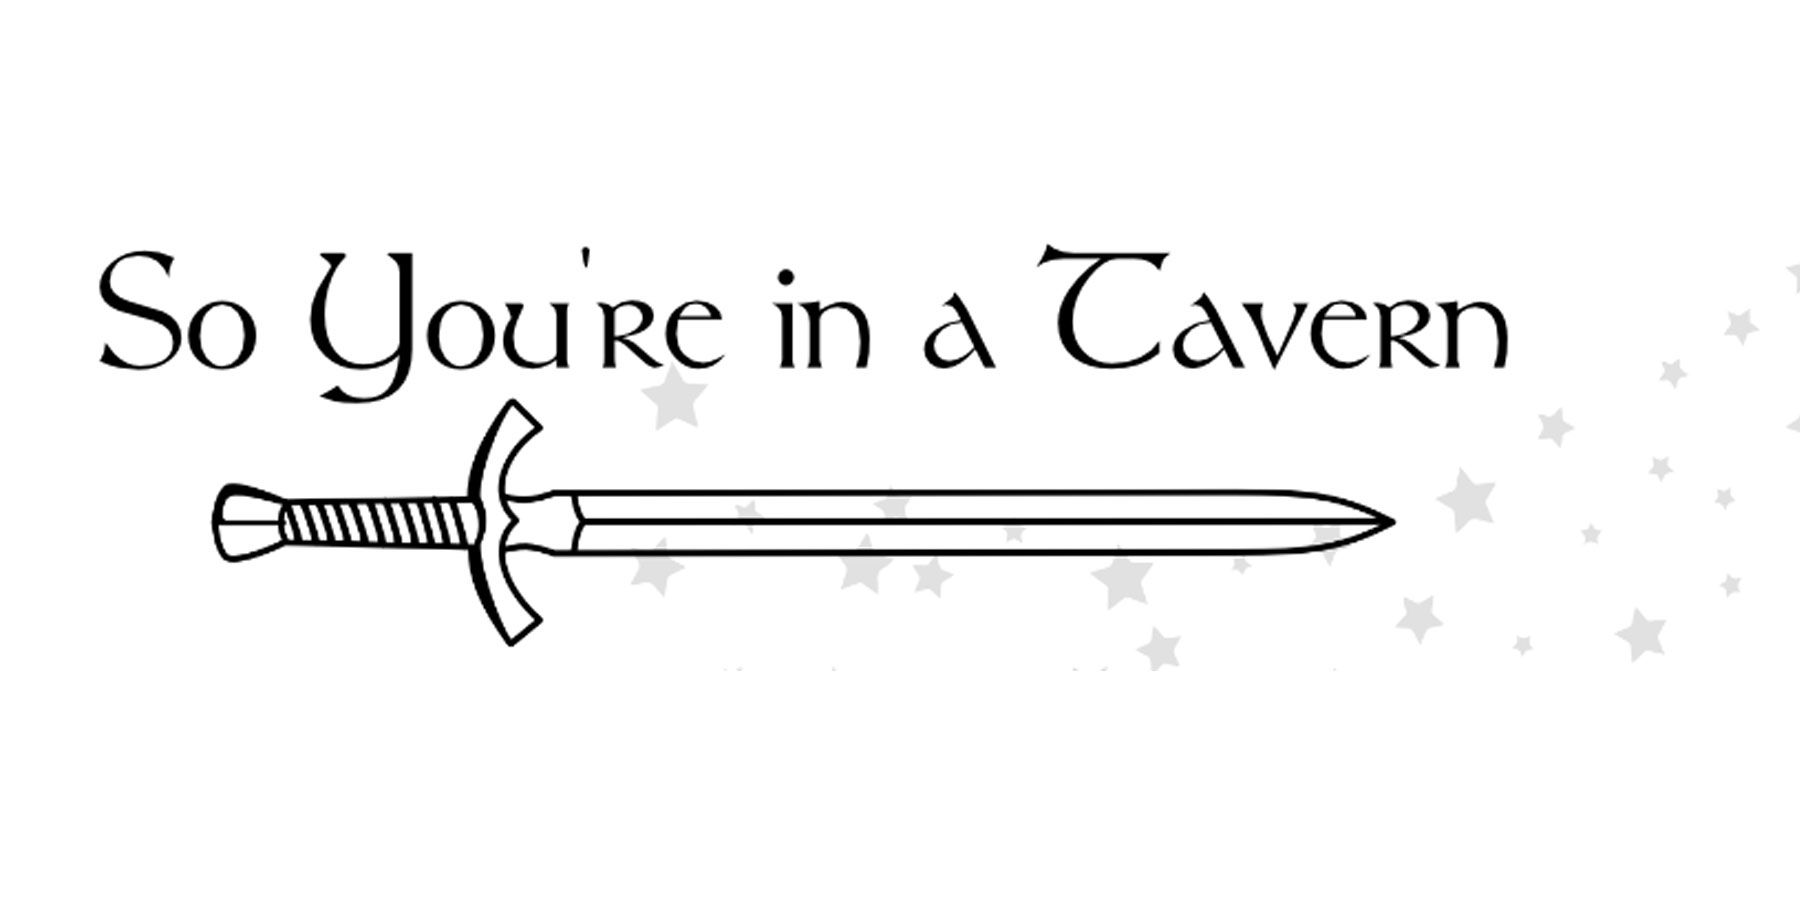 So-Youre-in-a-tavern-Sword-and-Stars-logo